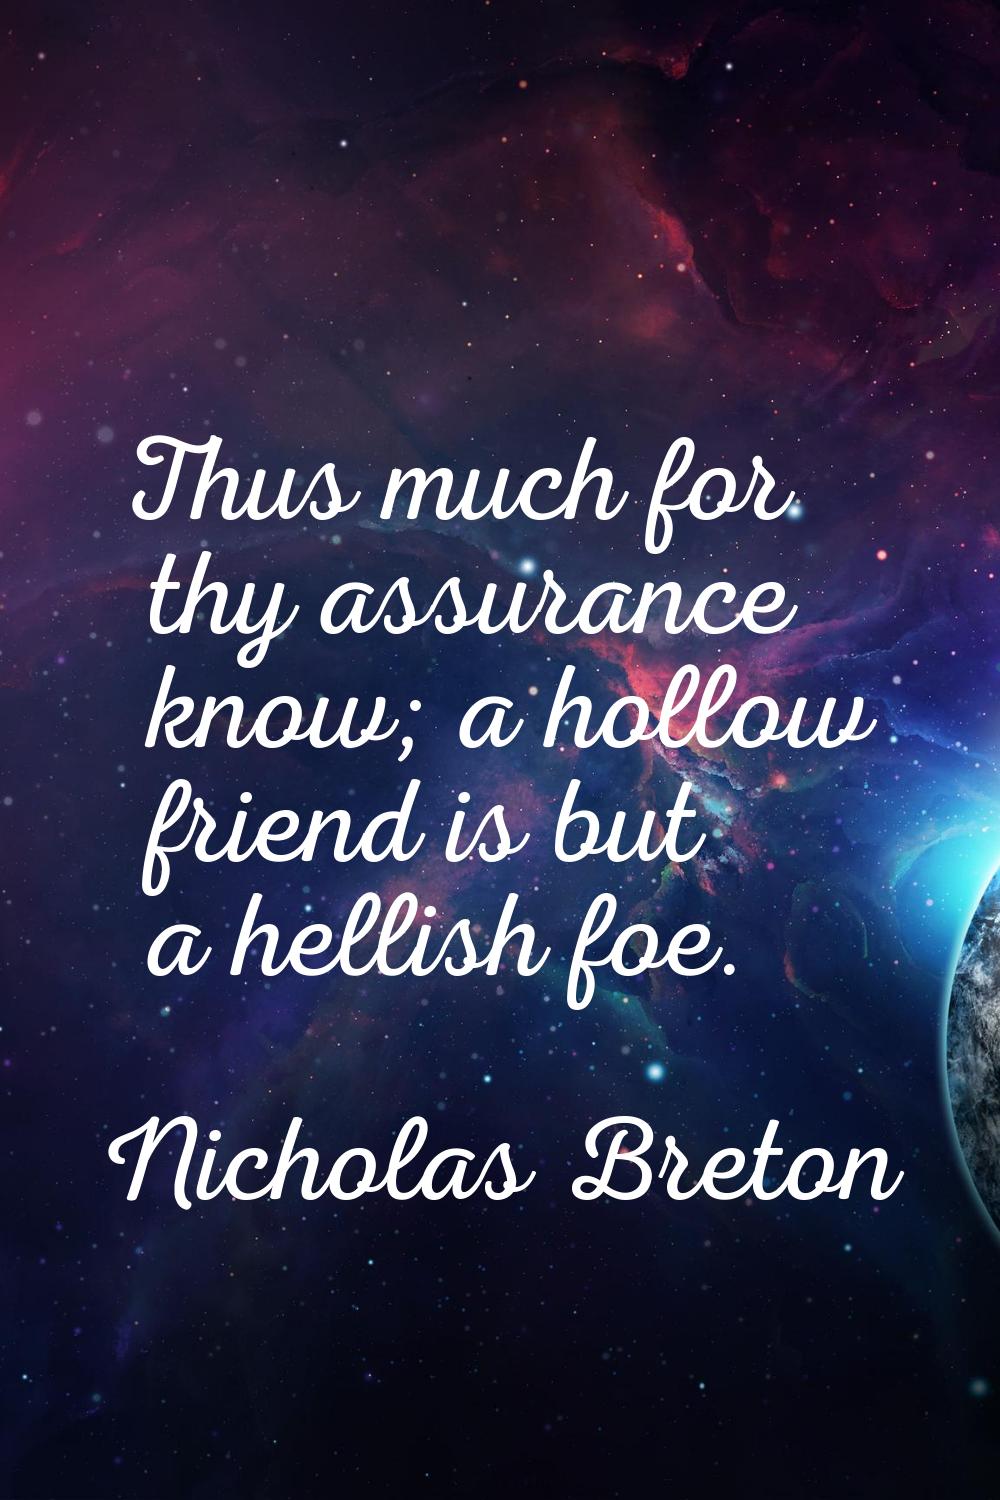 Thus much for thy assurance know; a hollow friend is but a hellish foe.